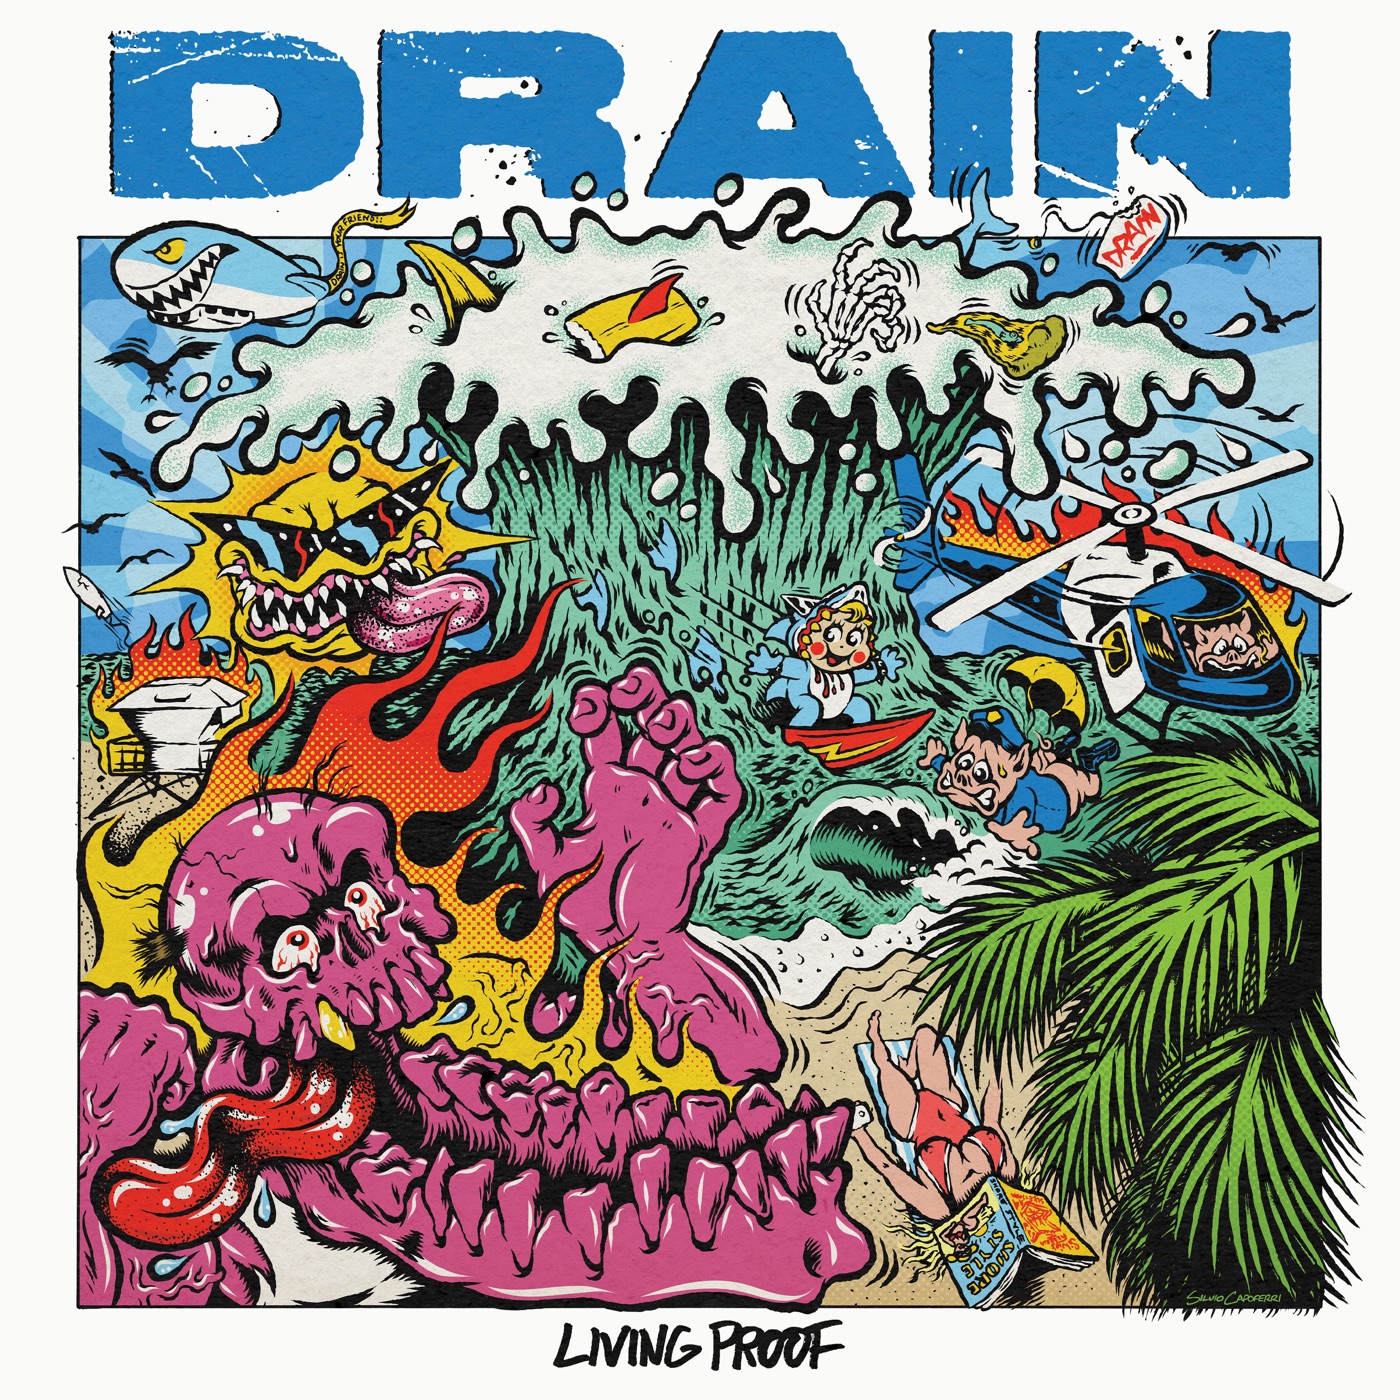 LIVING PROOF by DRAIN